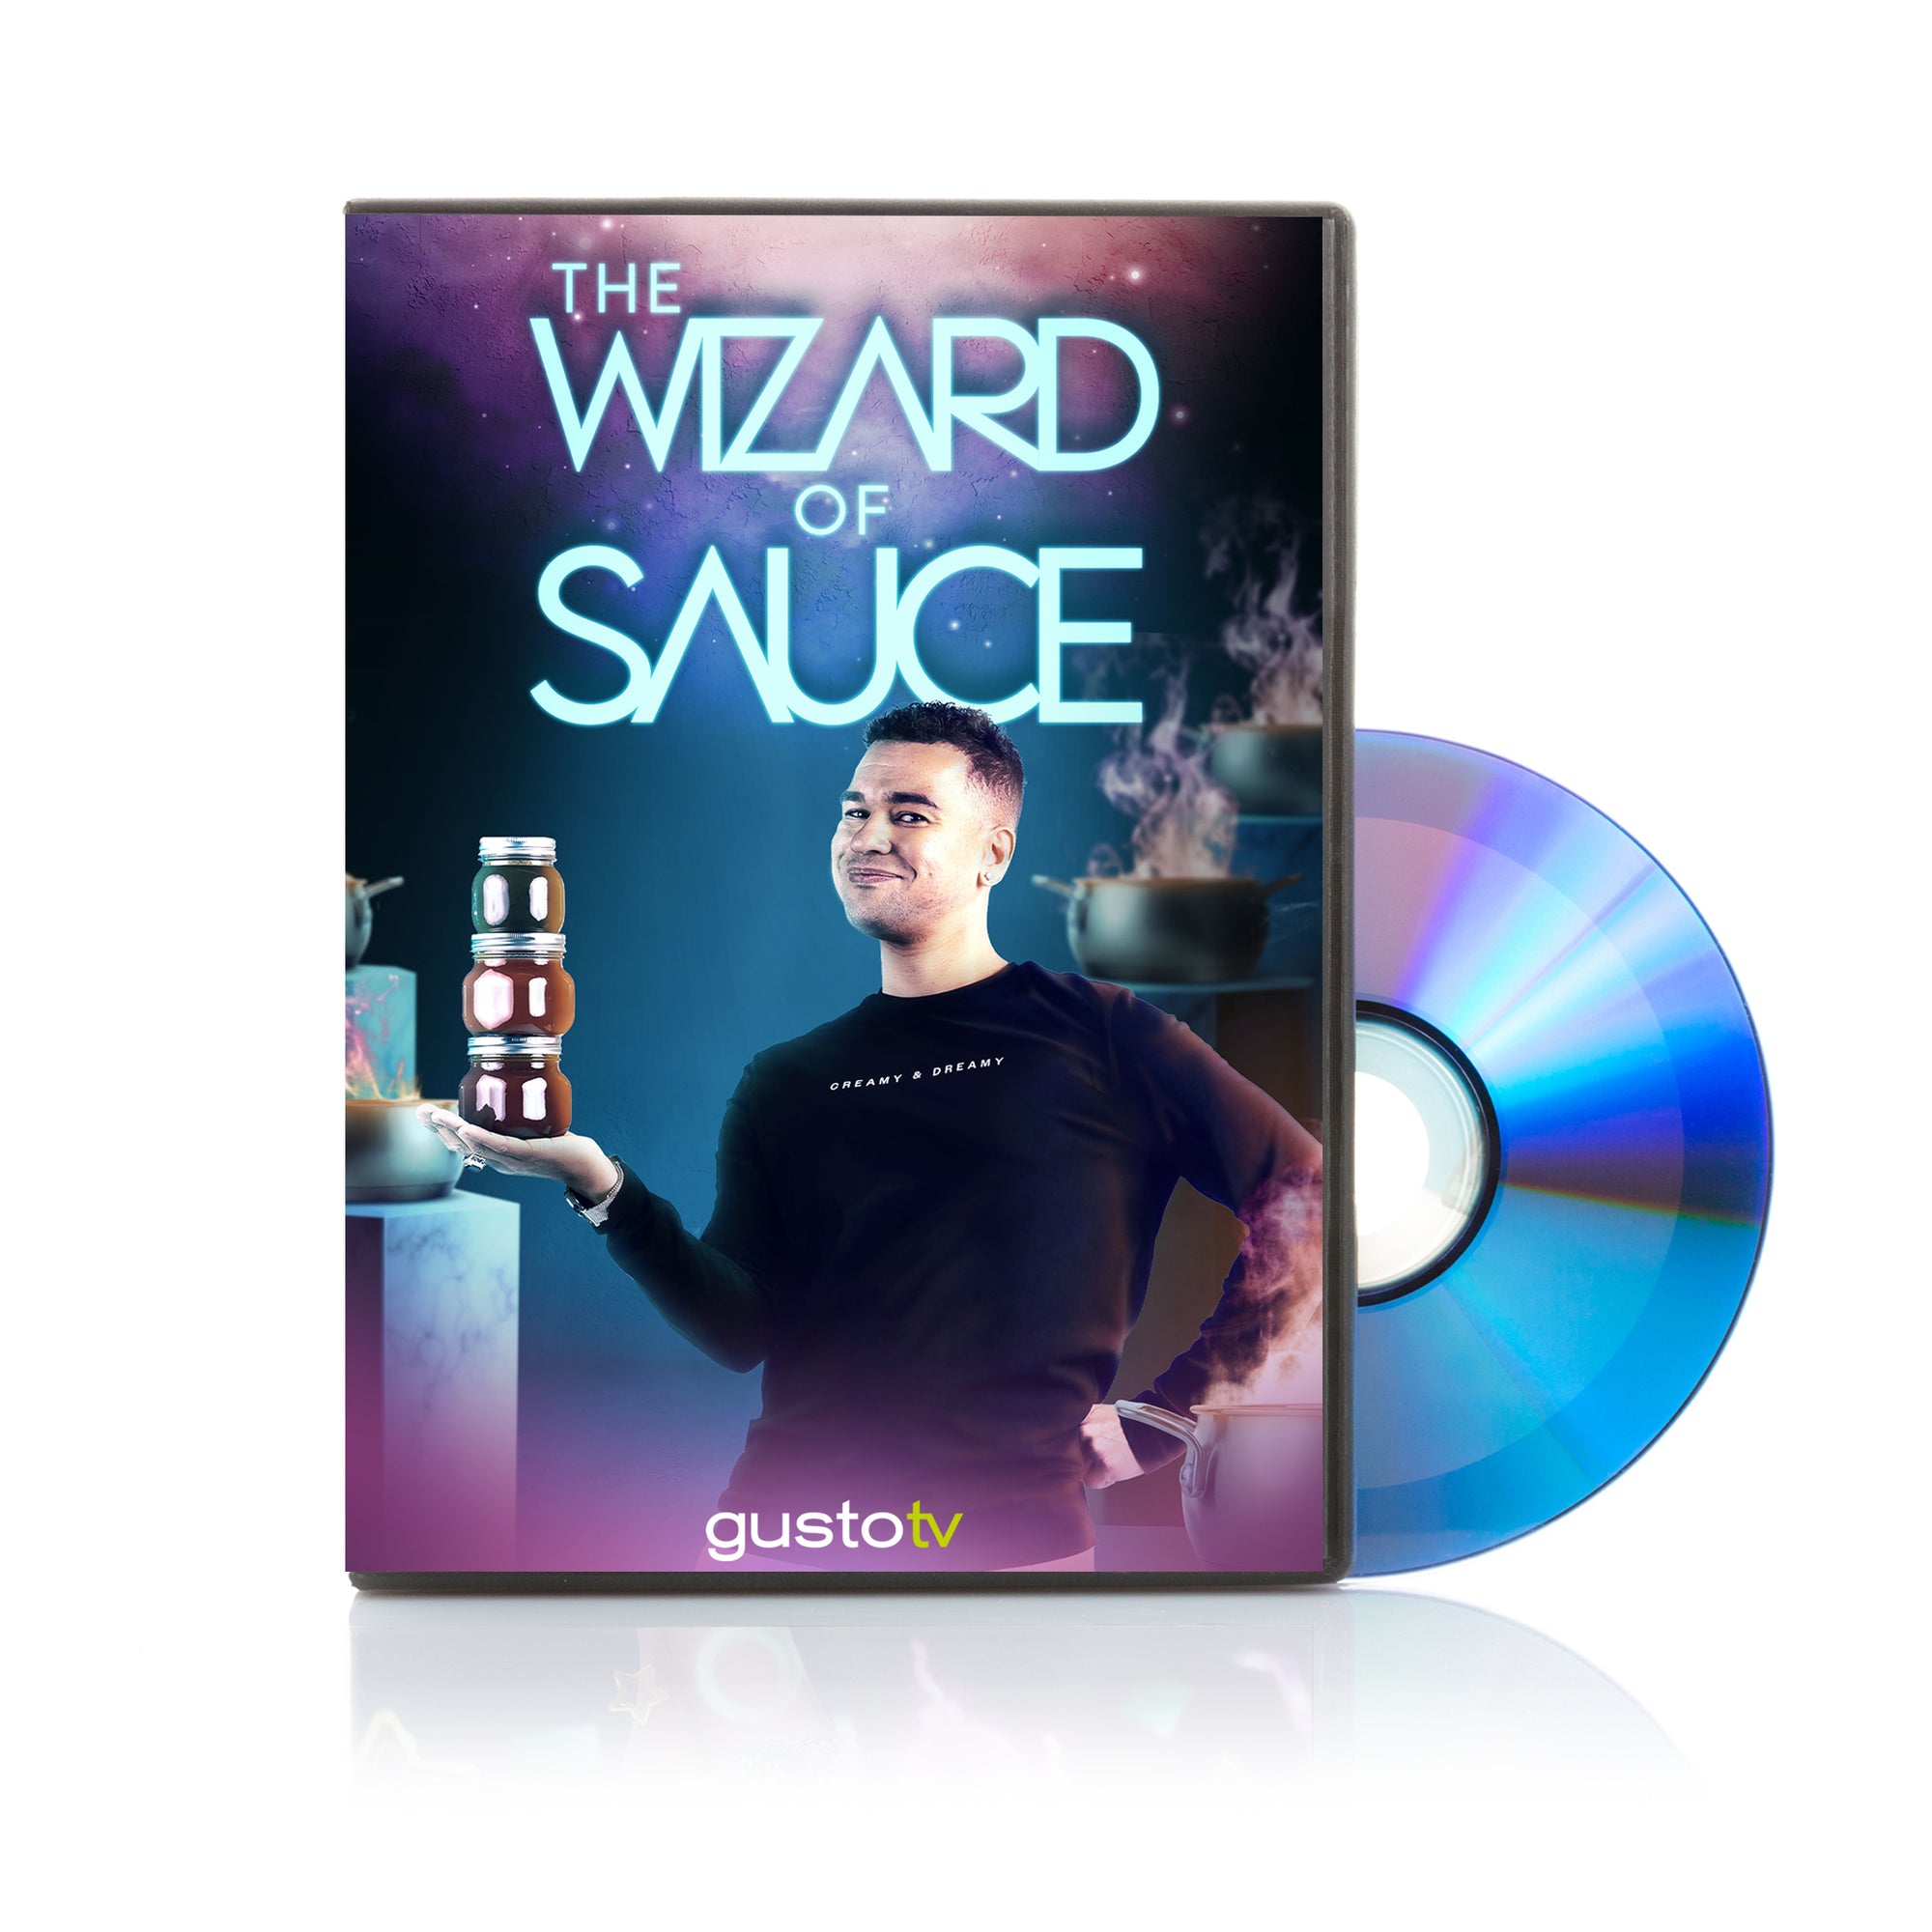 The Wizard of Sauce DVD